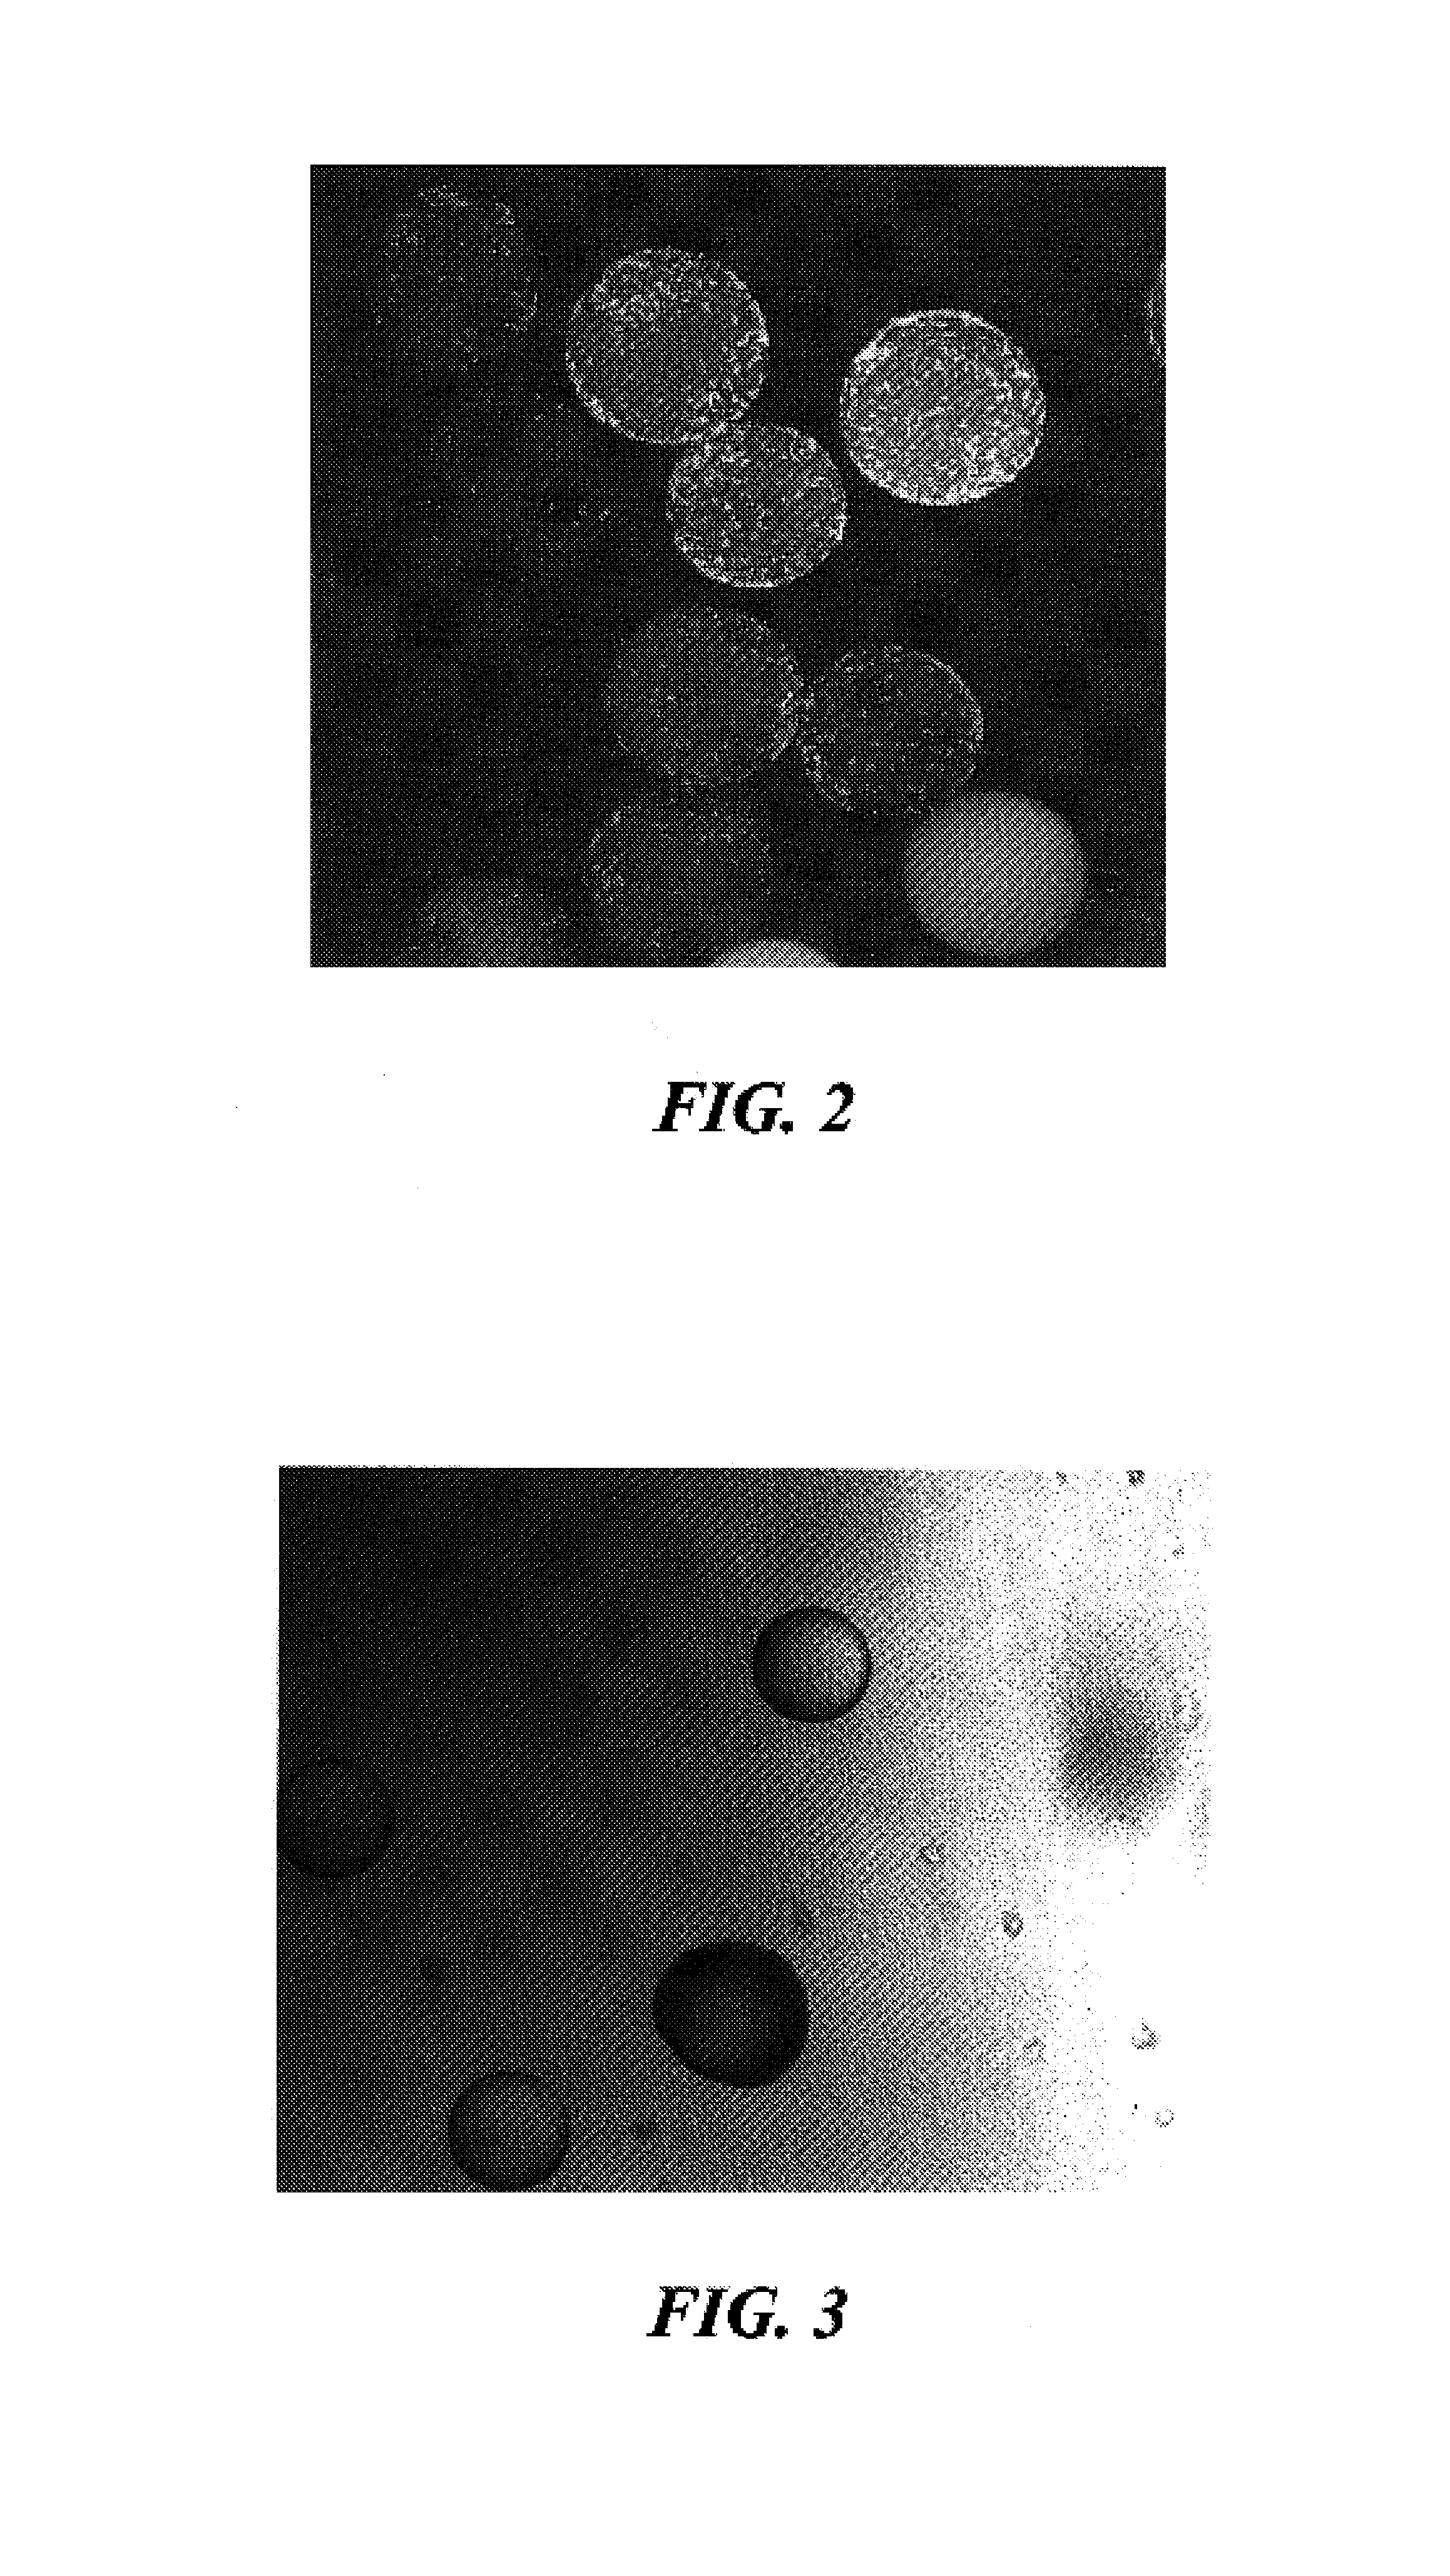 Method for screening anti-adherent compounds on polymers for preventing biofilm formation